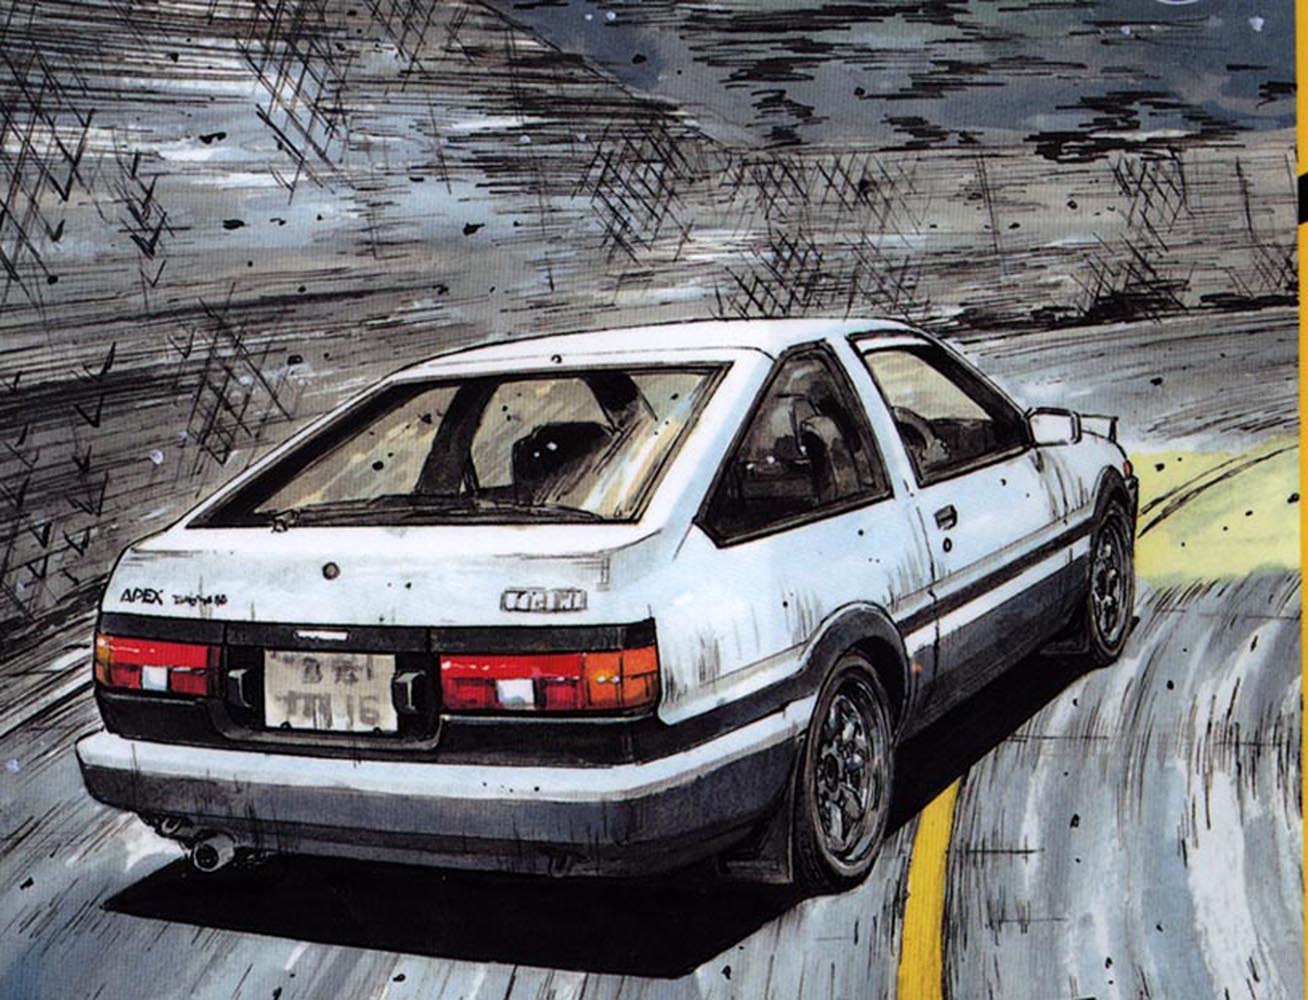 image For > Ae86 Initial D Wallpaper